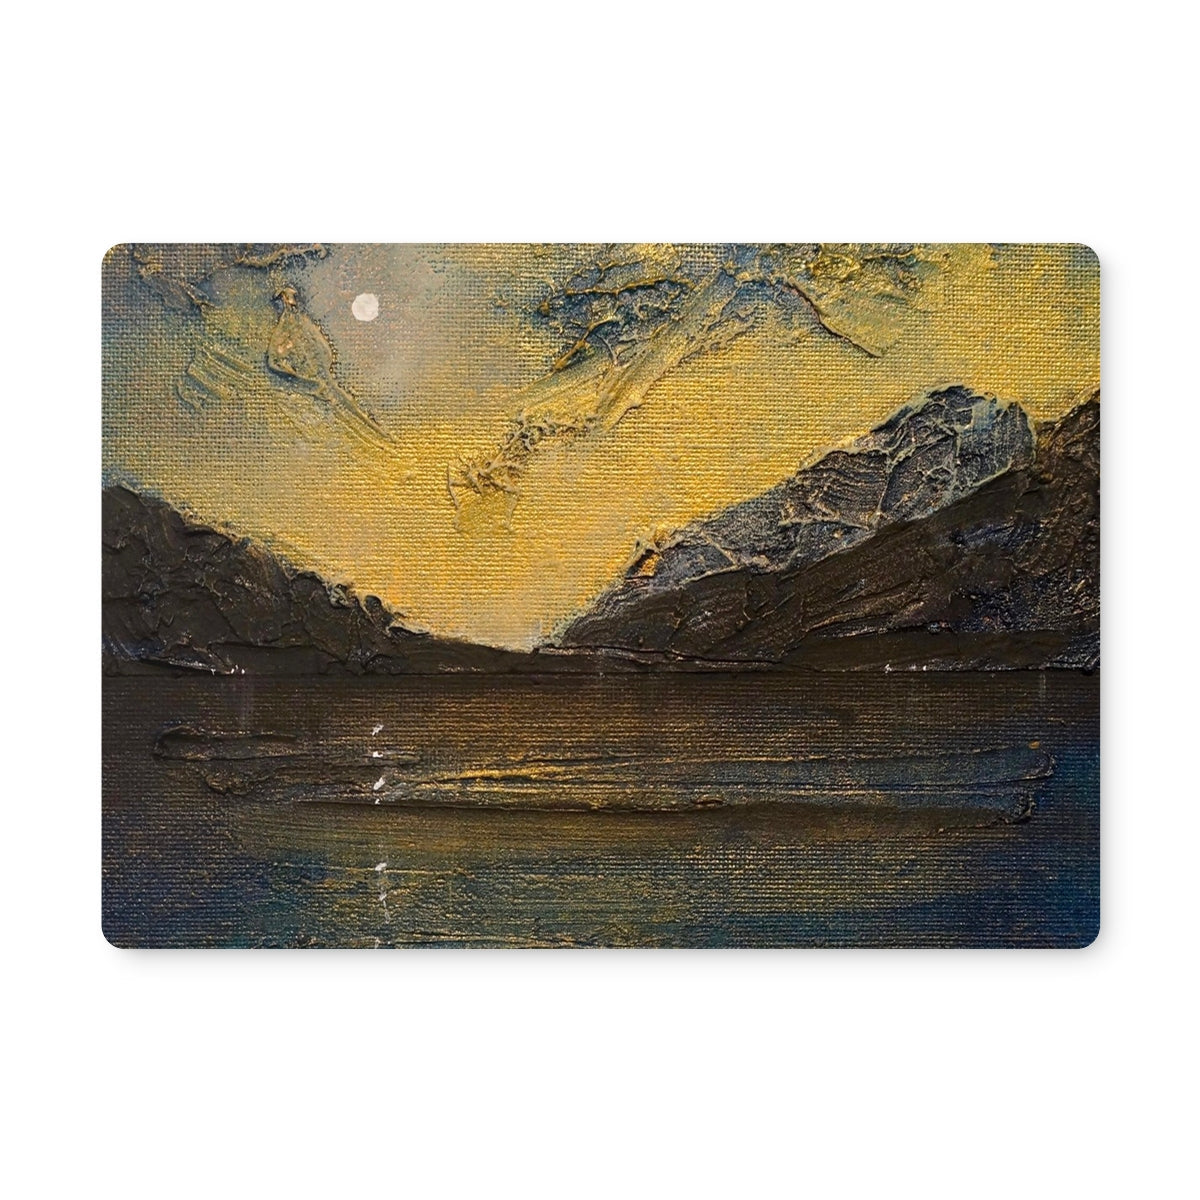 Loch Lomond Moonlight Art Gifts Placemat-Placemats-Scottish Lochs & Mountains Art Gallery-2 Placemats-Paintings, Prints, Homeware, Art Gifts From Scotland By Scottish Artist Kevin Hunter